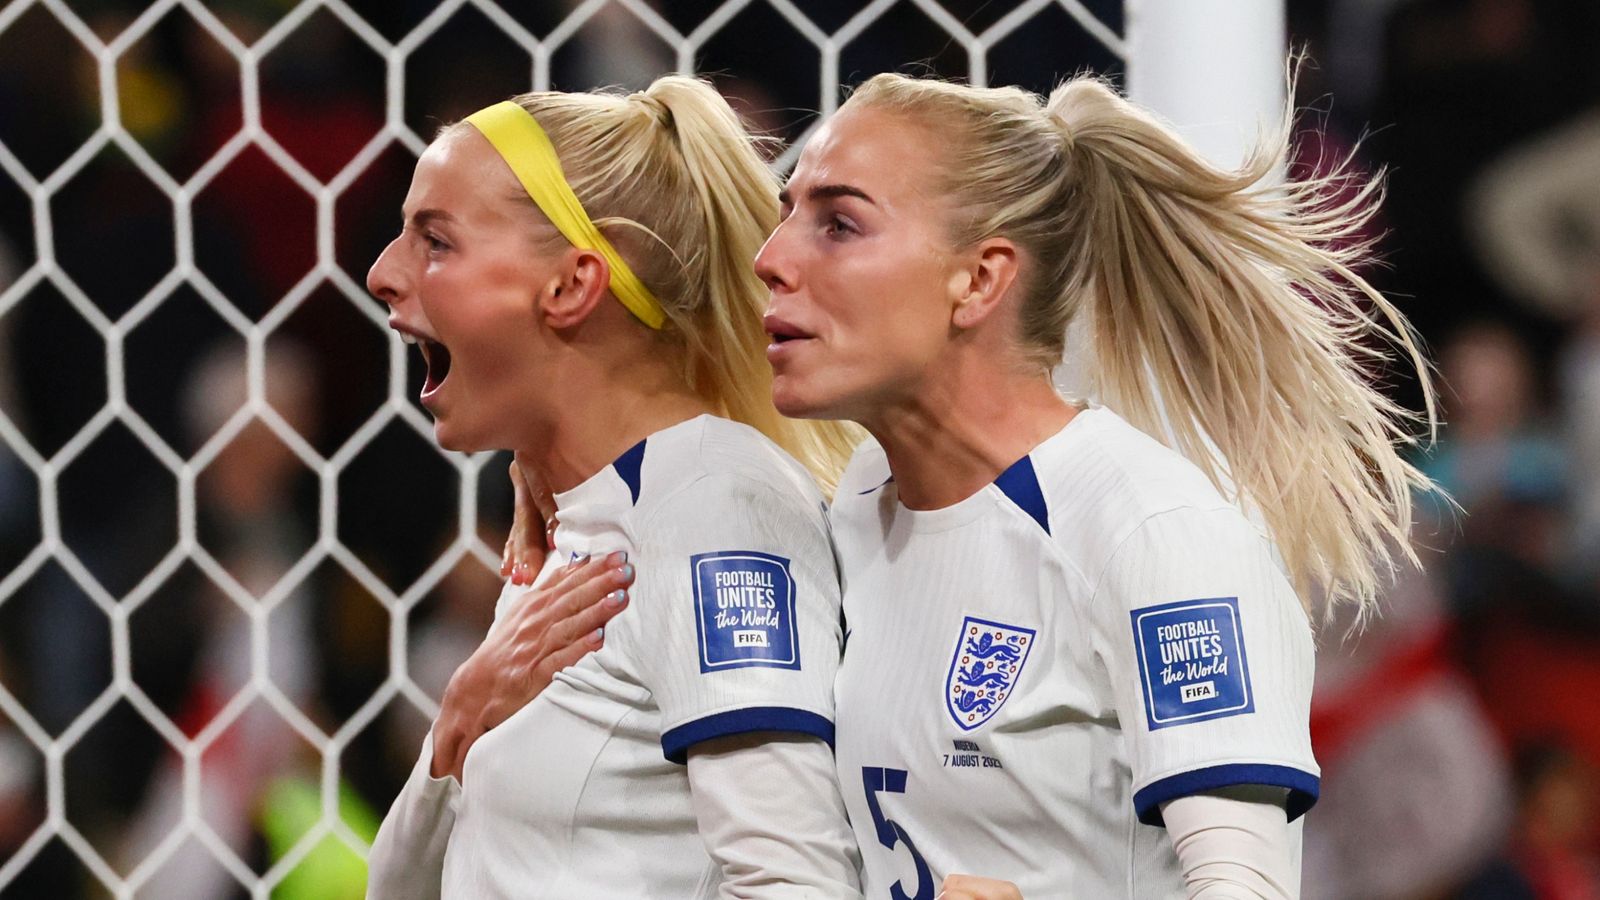 England v Australia: Lionesses set to roar as they attempt to reach first ever World Cup final